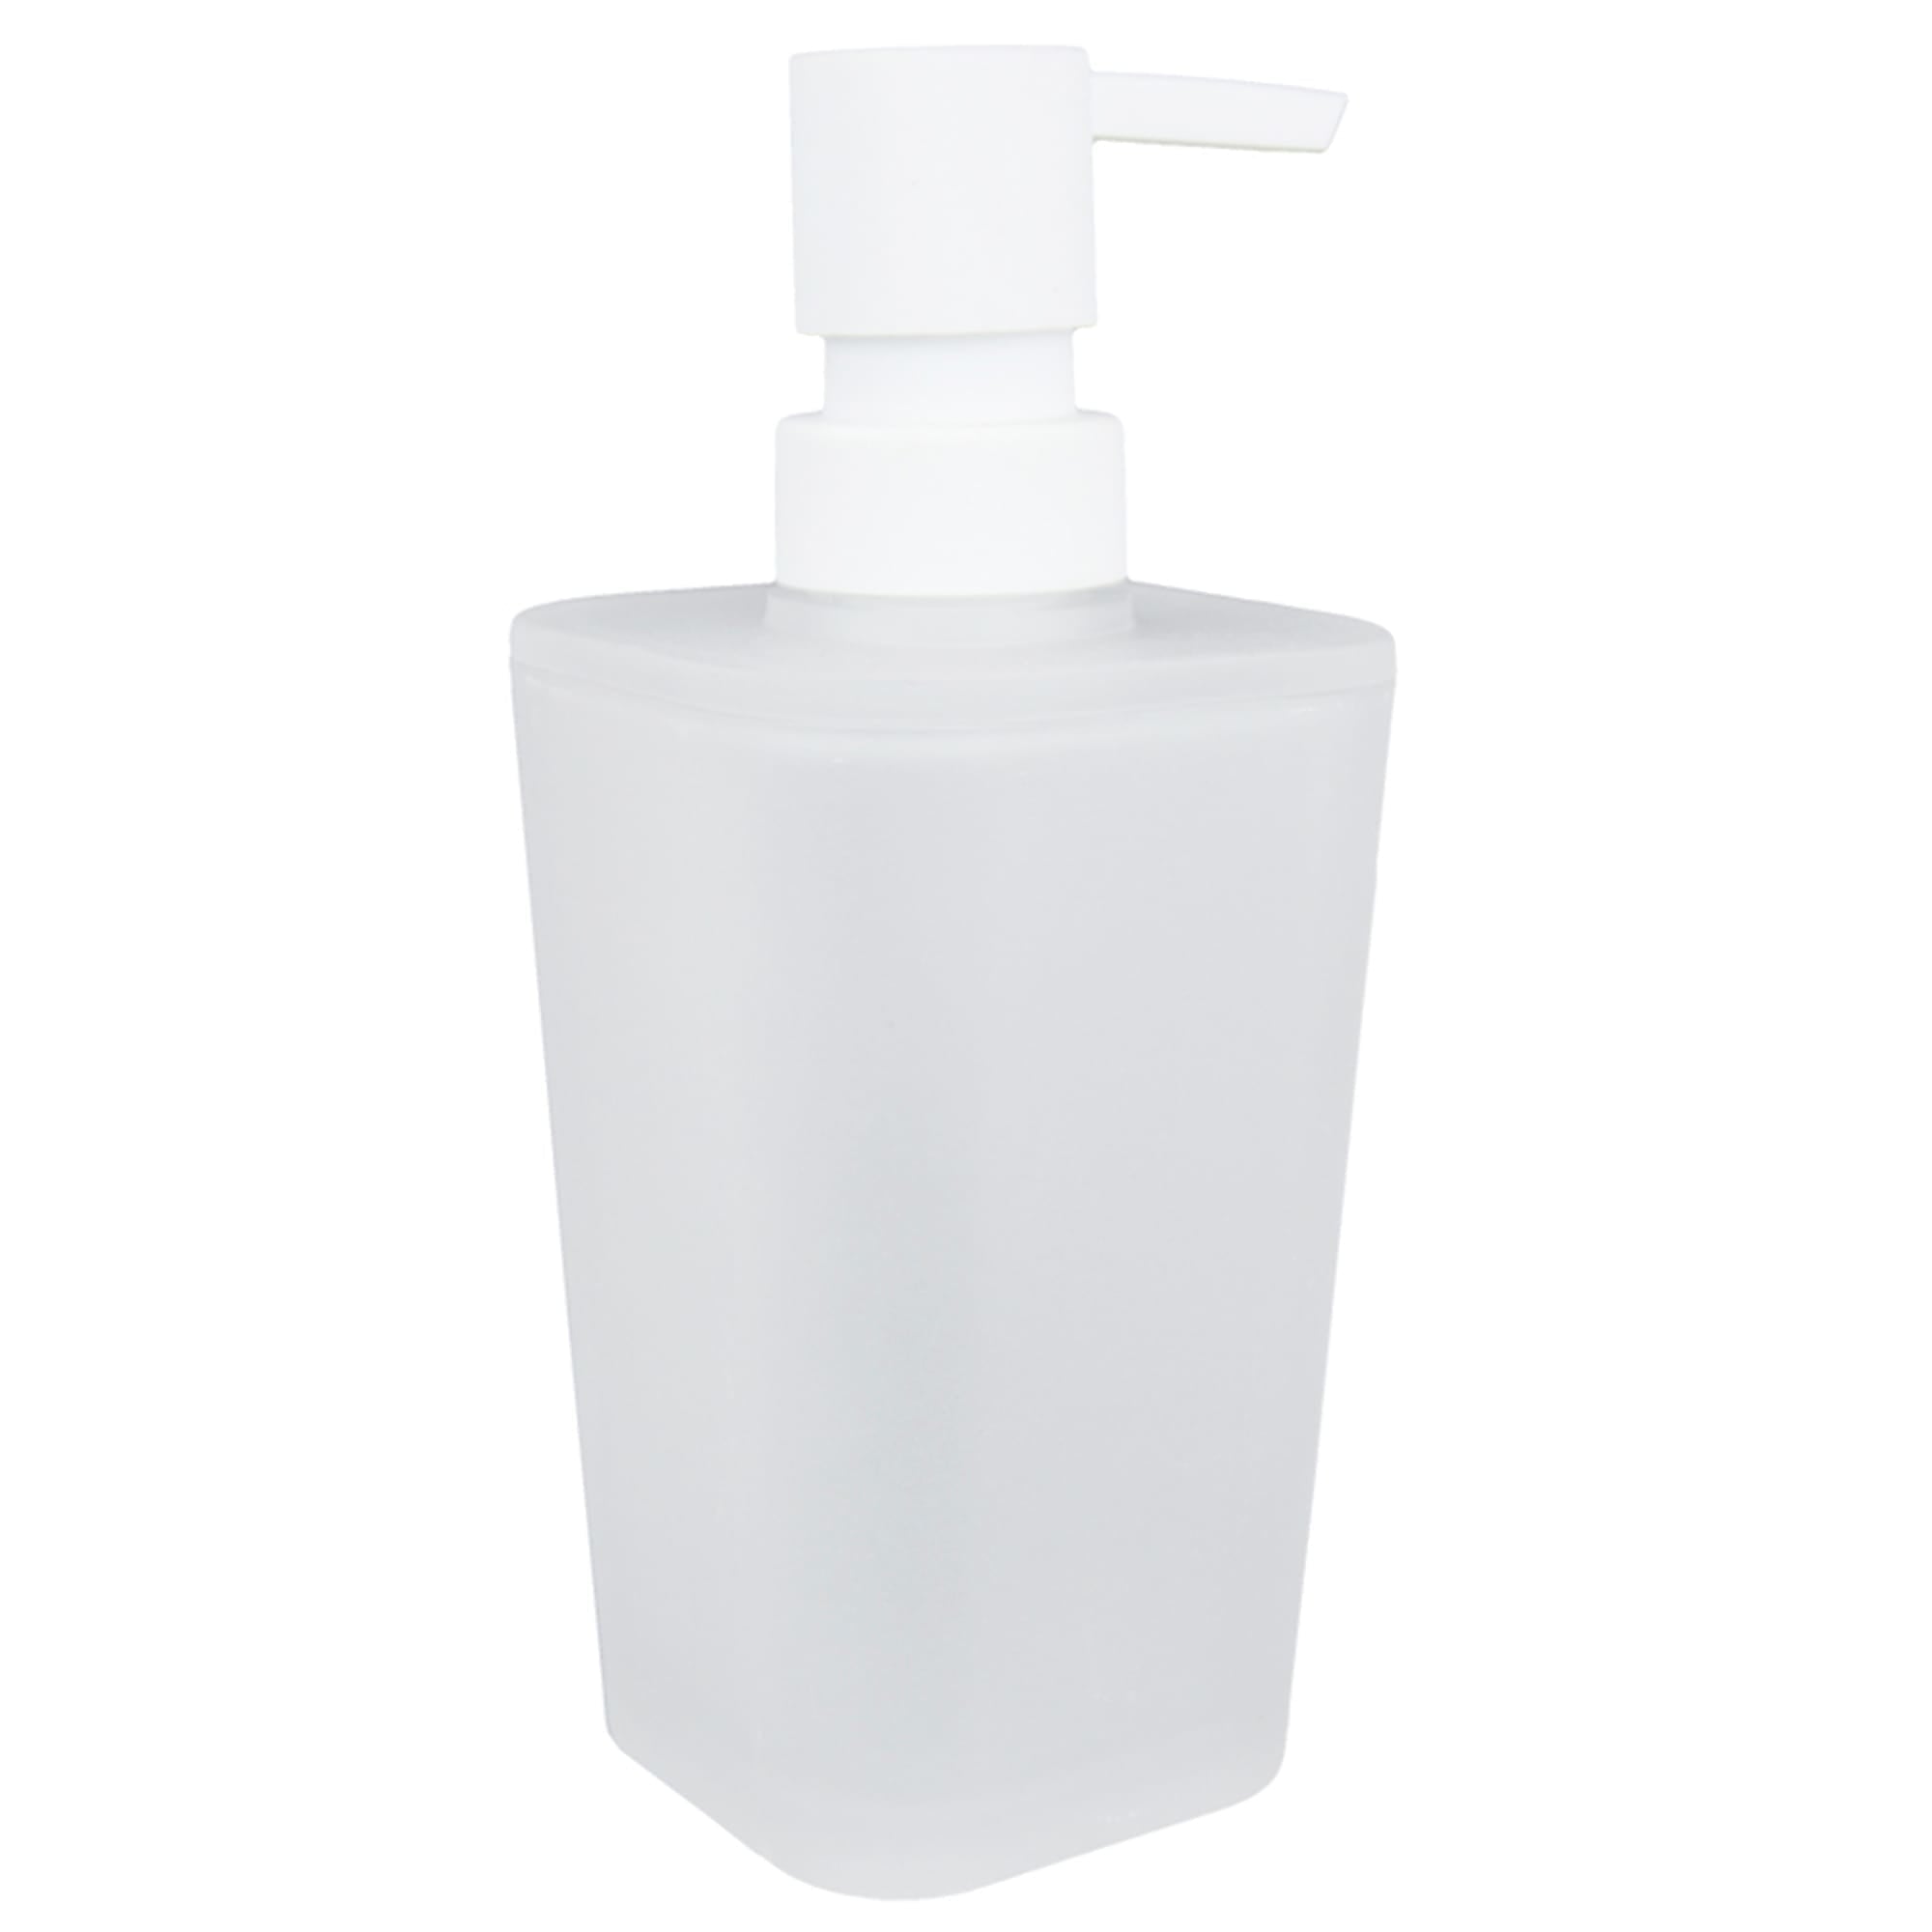 Home Basics Frosted Rubberized Plastic  10 oz. Hand Soap Dispenser with Plastic Pump $4.00 EACH, CASE PACK OF 12